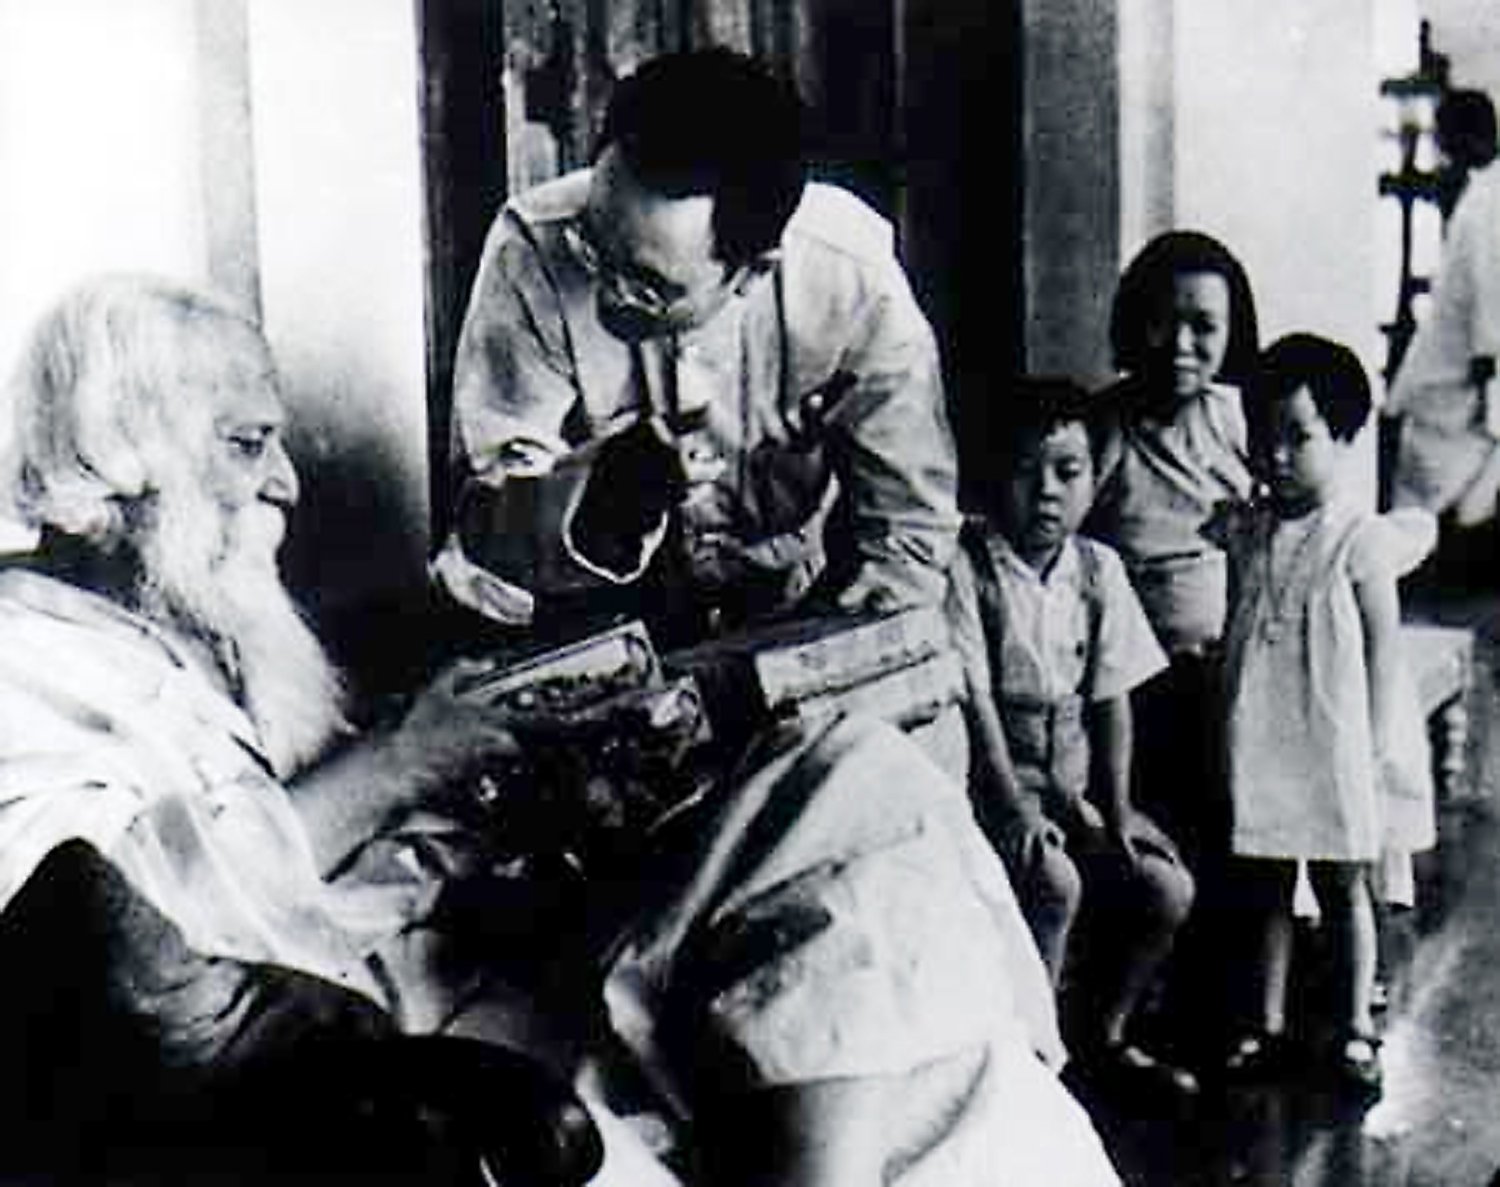 Read this to get a glimpse into Tagore's bond with China.